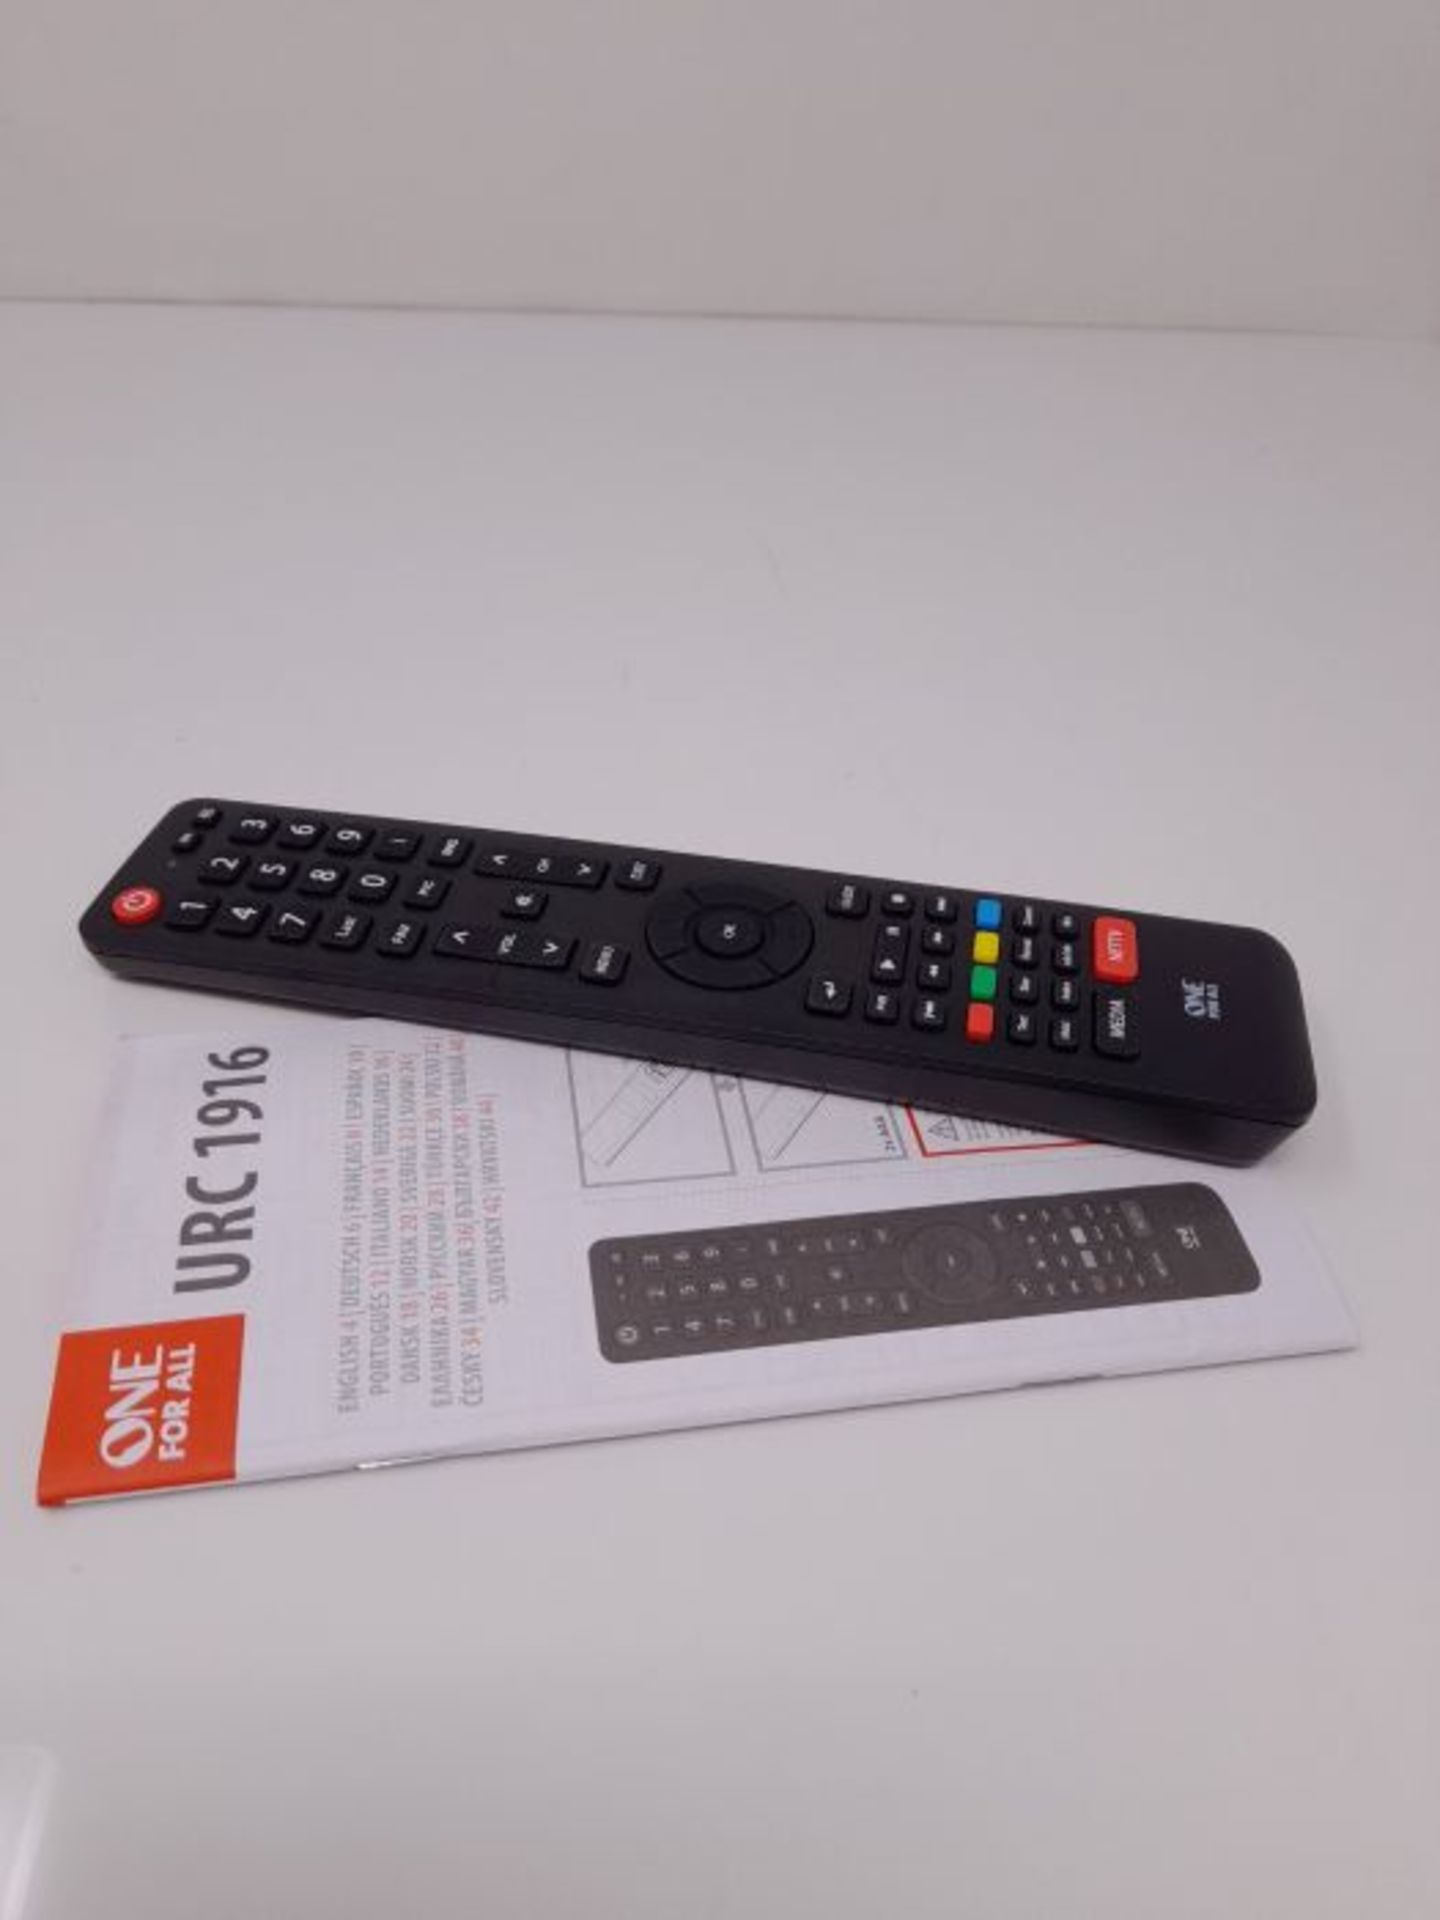 One For All Hisense TV Replacement remote URC1916 - Works with ALL Hisense televisions - Image 3 of 3